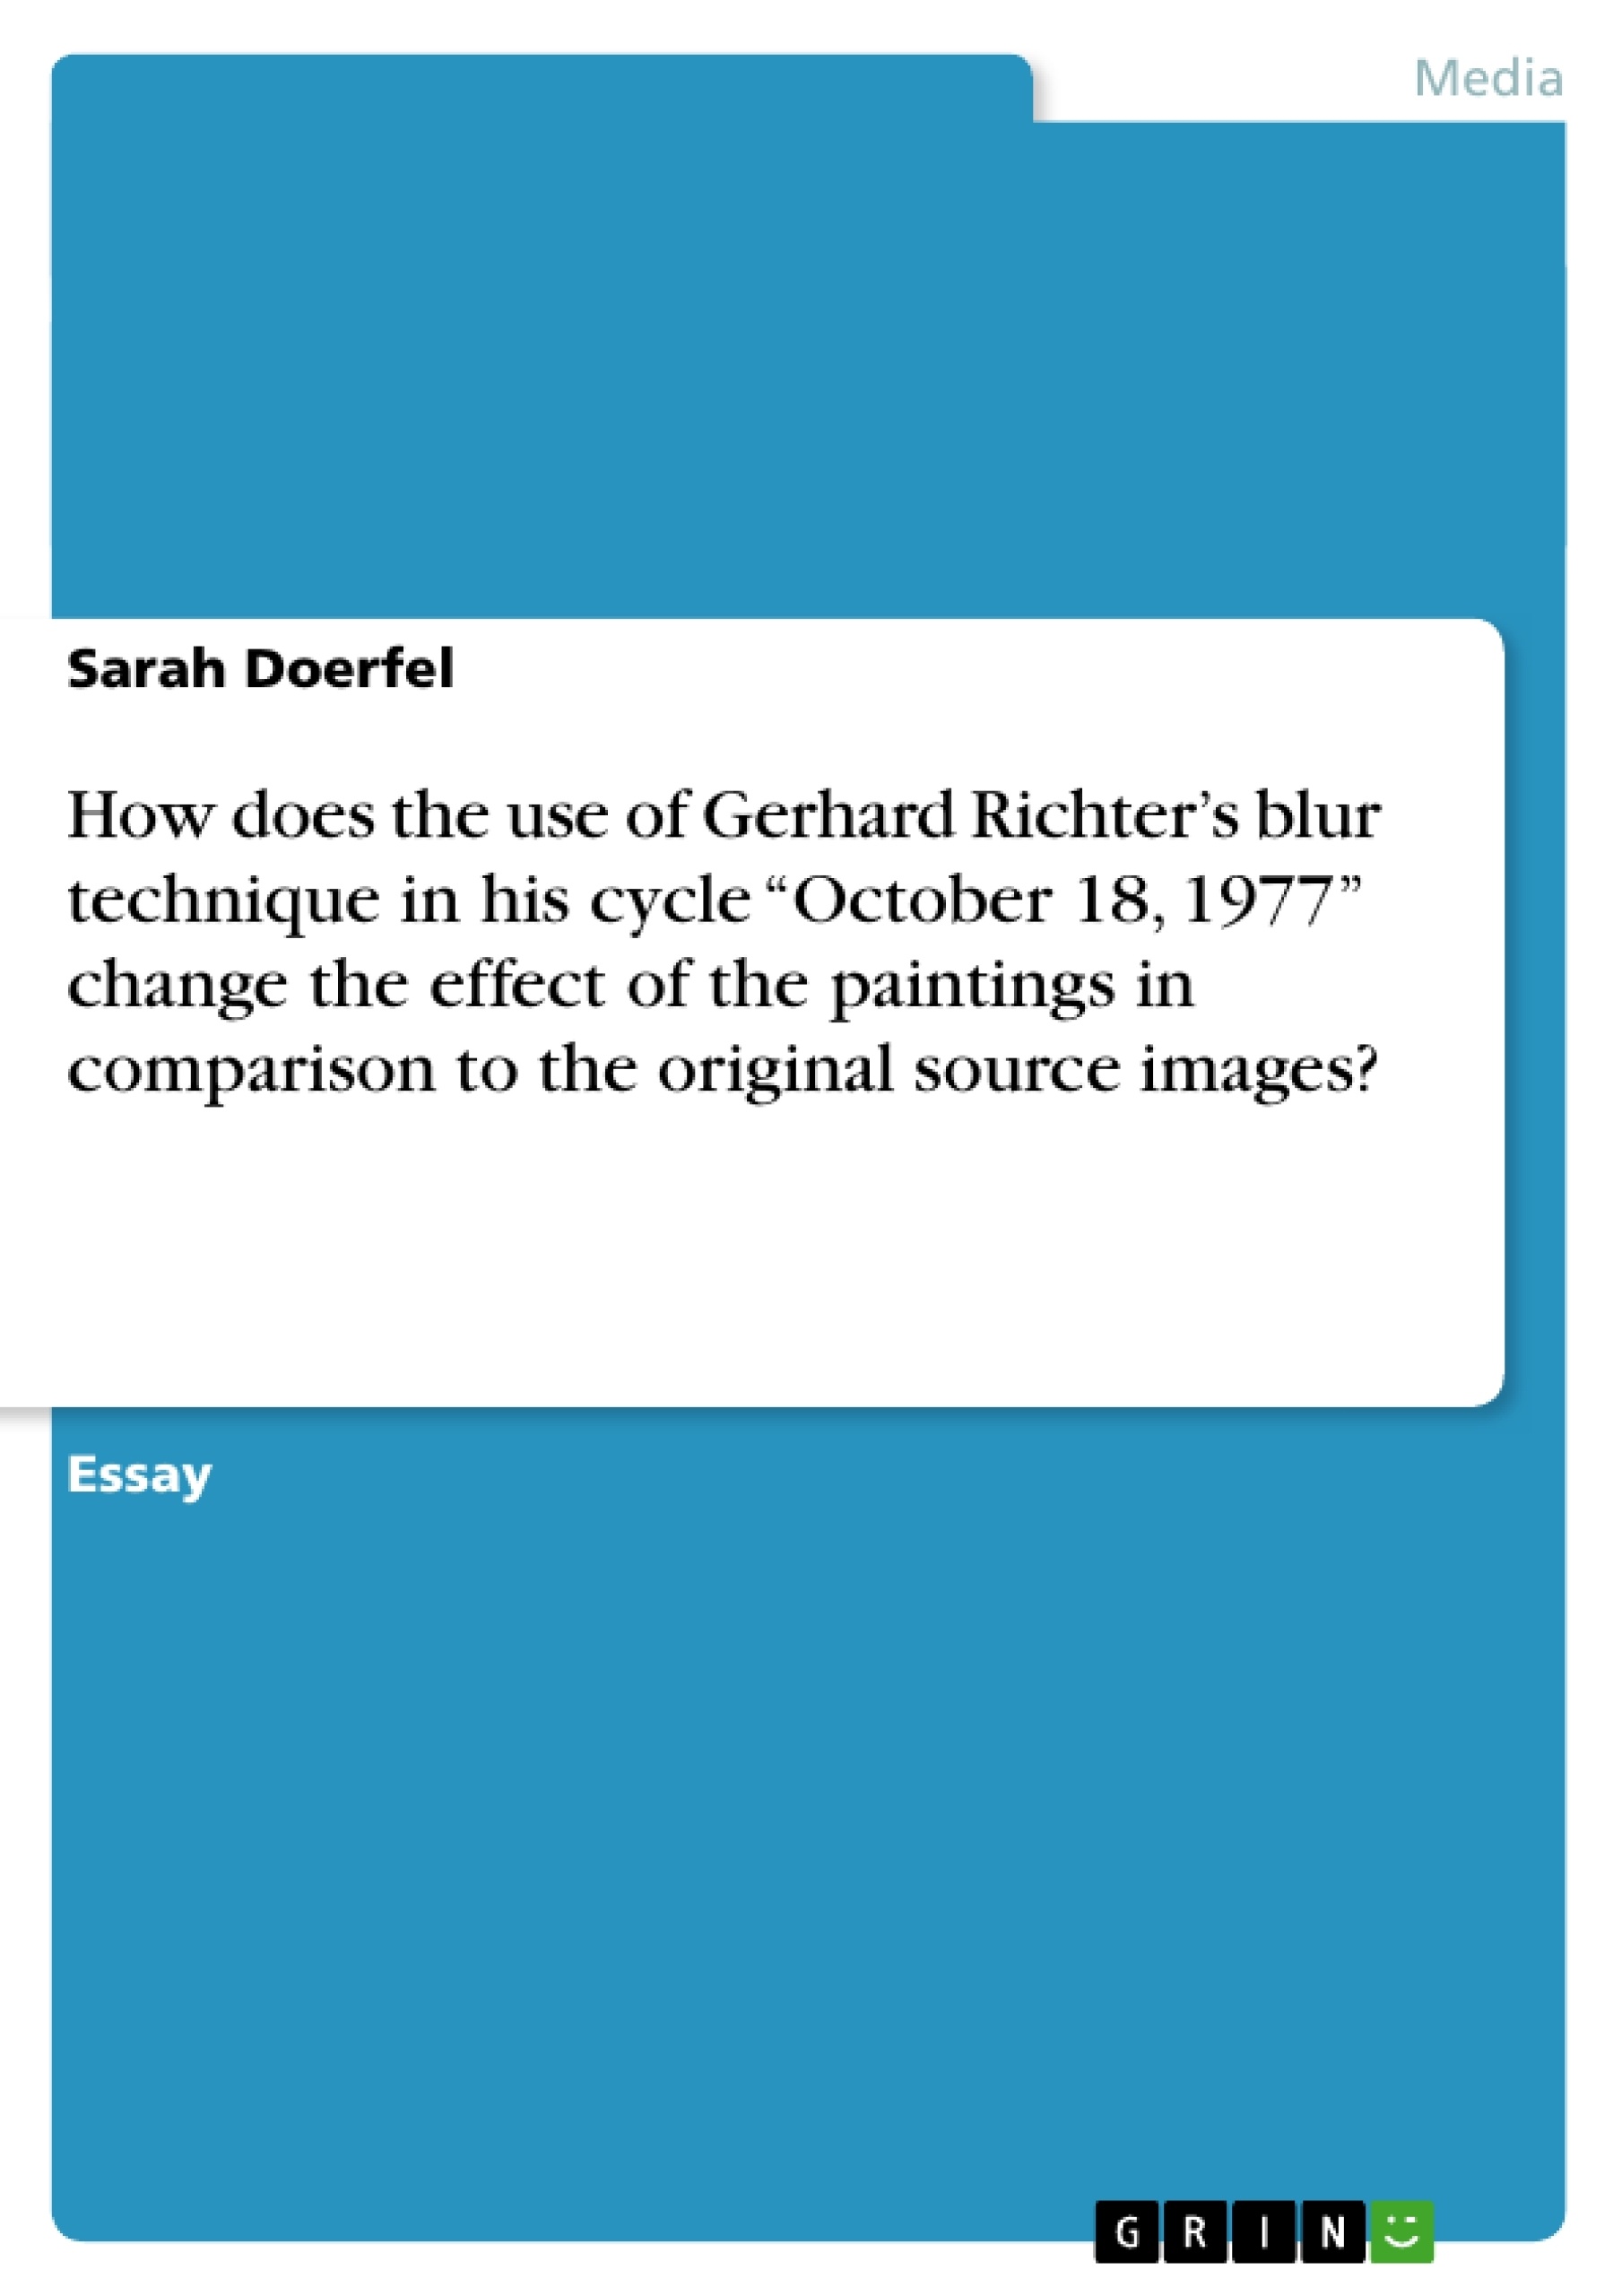 Titre: How does the use of Gerhard Richter’s blur technique in his cycle “October 18, 1977” change the effect of the paintings in comparison to the original source images?